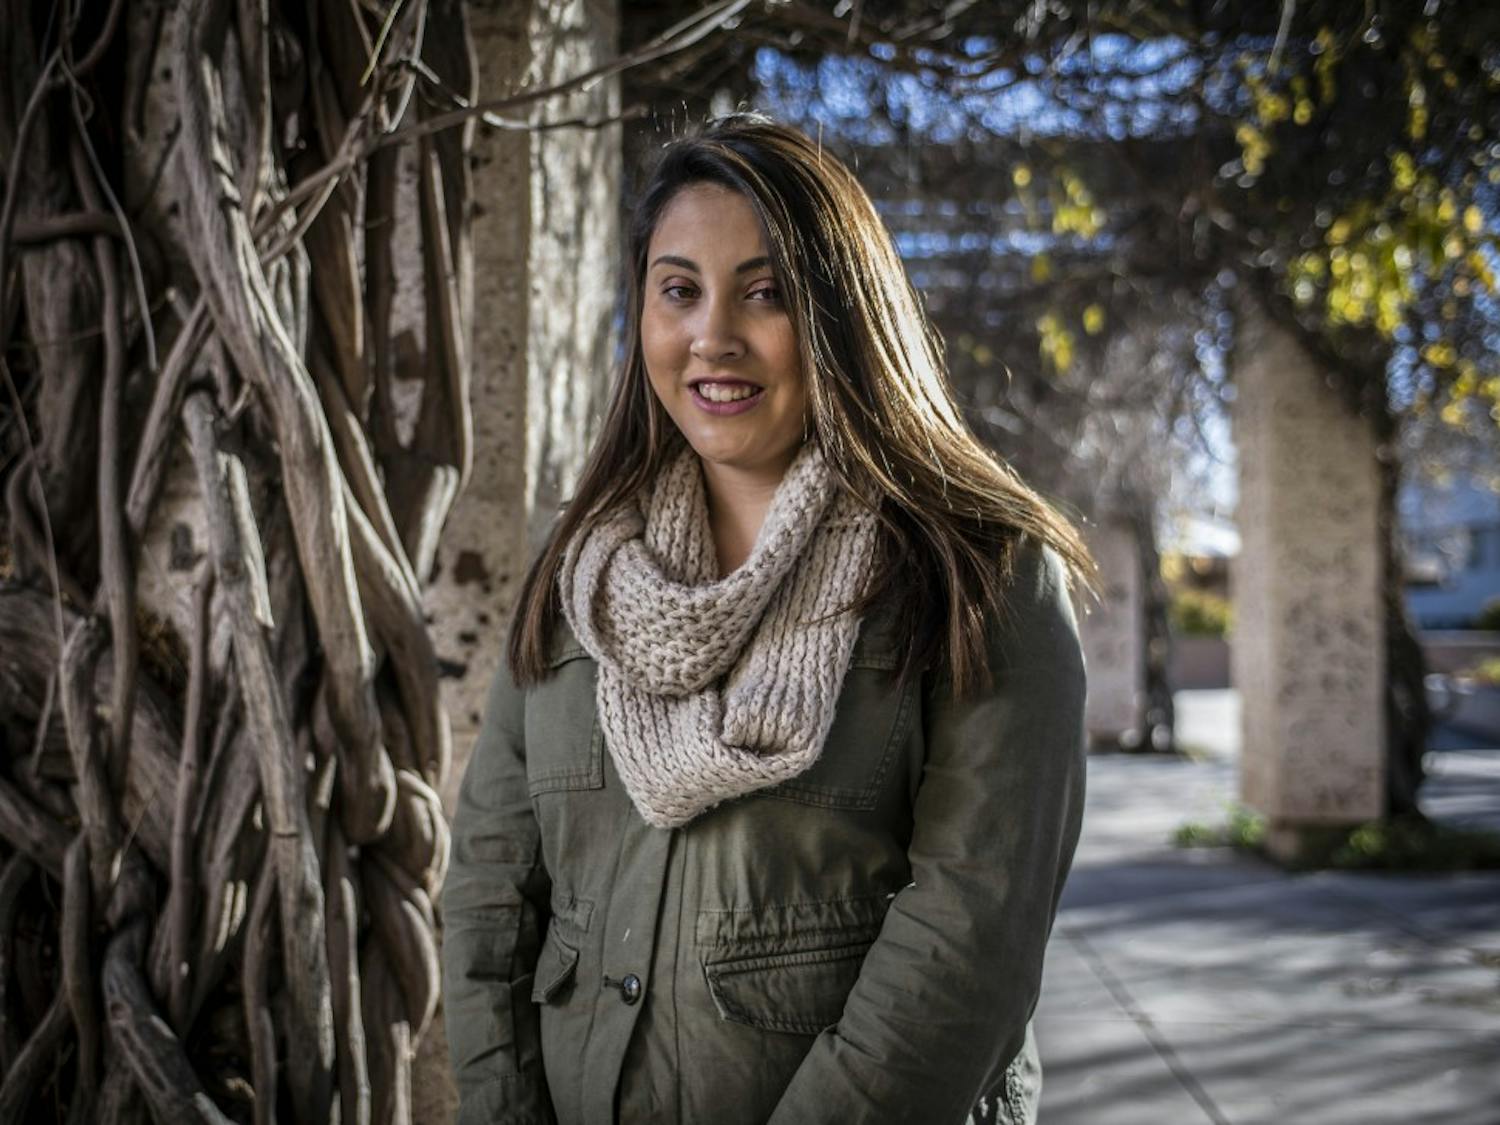 Alison De La Concepcion is graduating with a Bachelor of Science in family studies while minoring in psychology. She plans to pursue her master?s in counseling, with possible focuses in mental health, rehabilitation or couple and family therapy.
